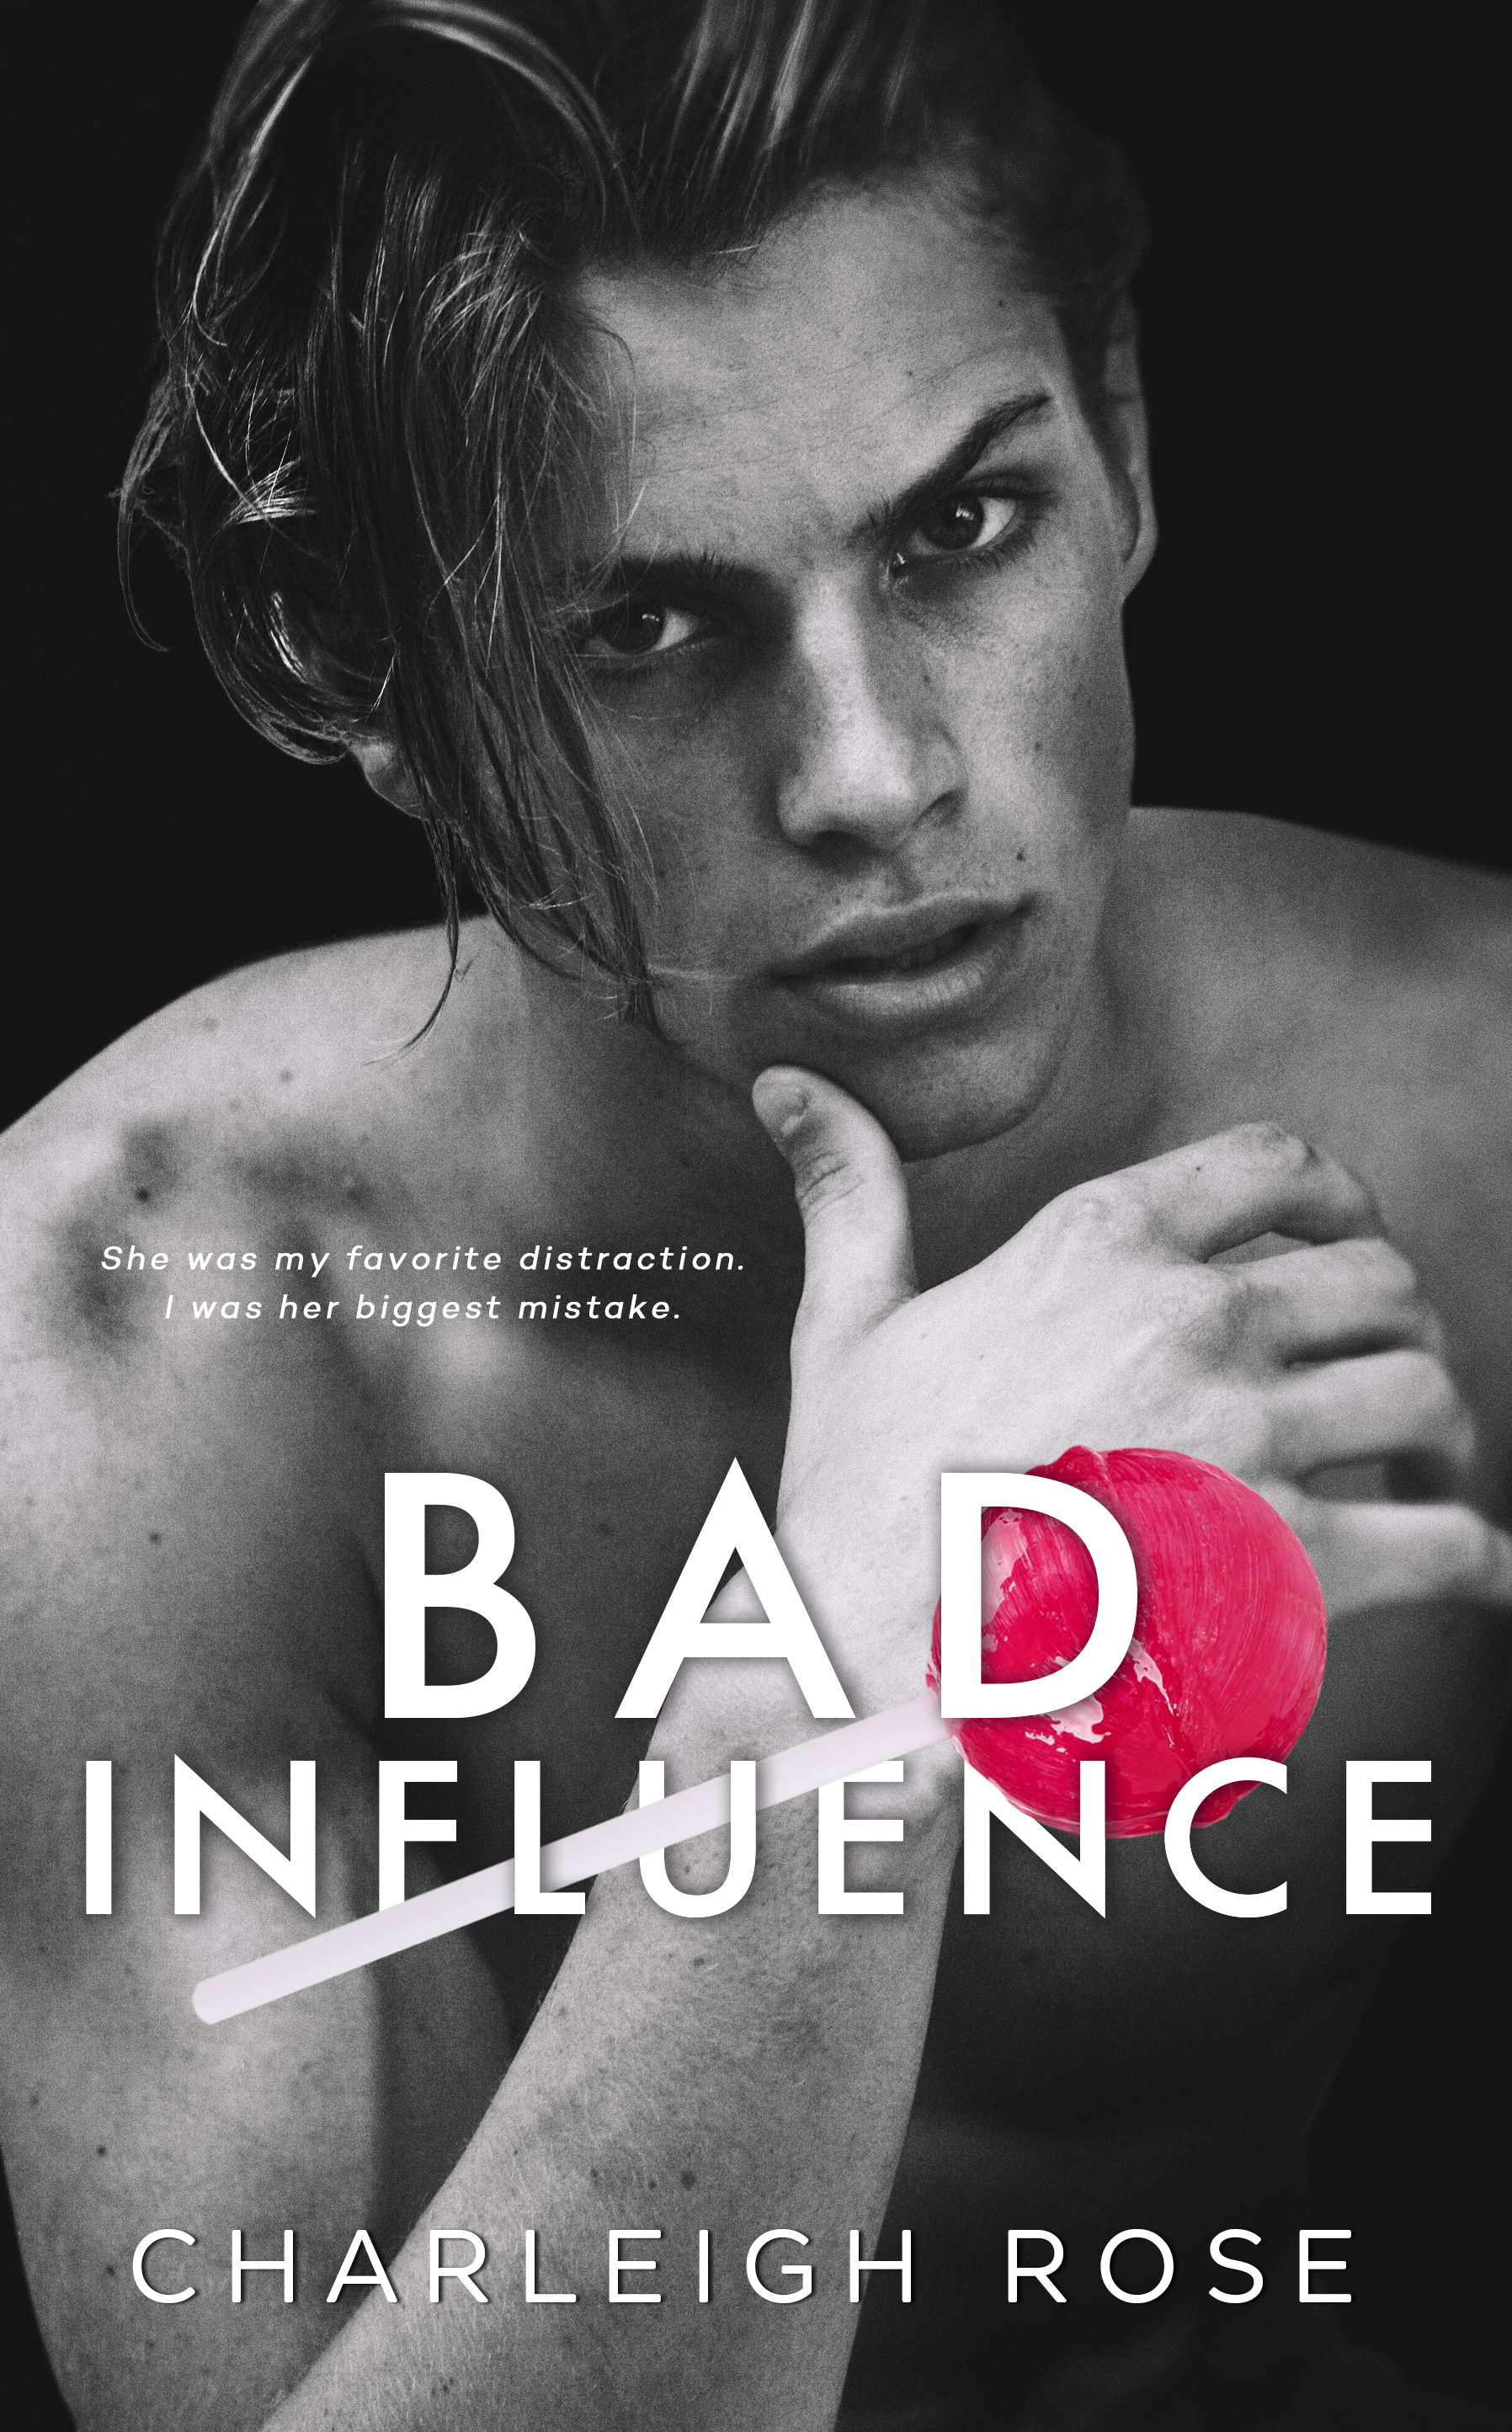 Bad Influence by Charleigh Rose Review